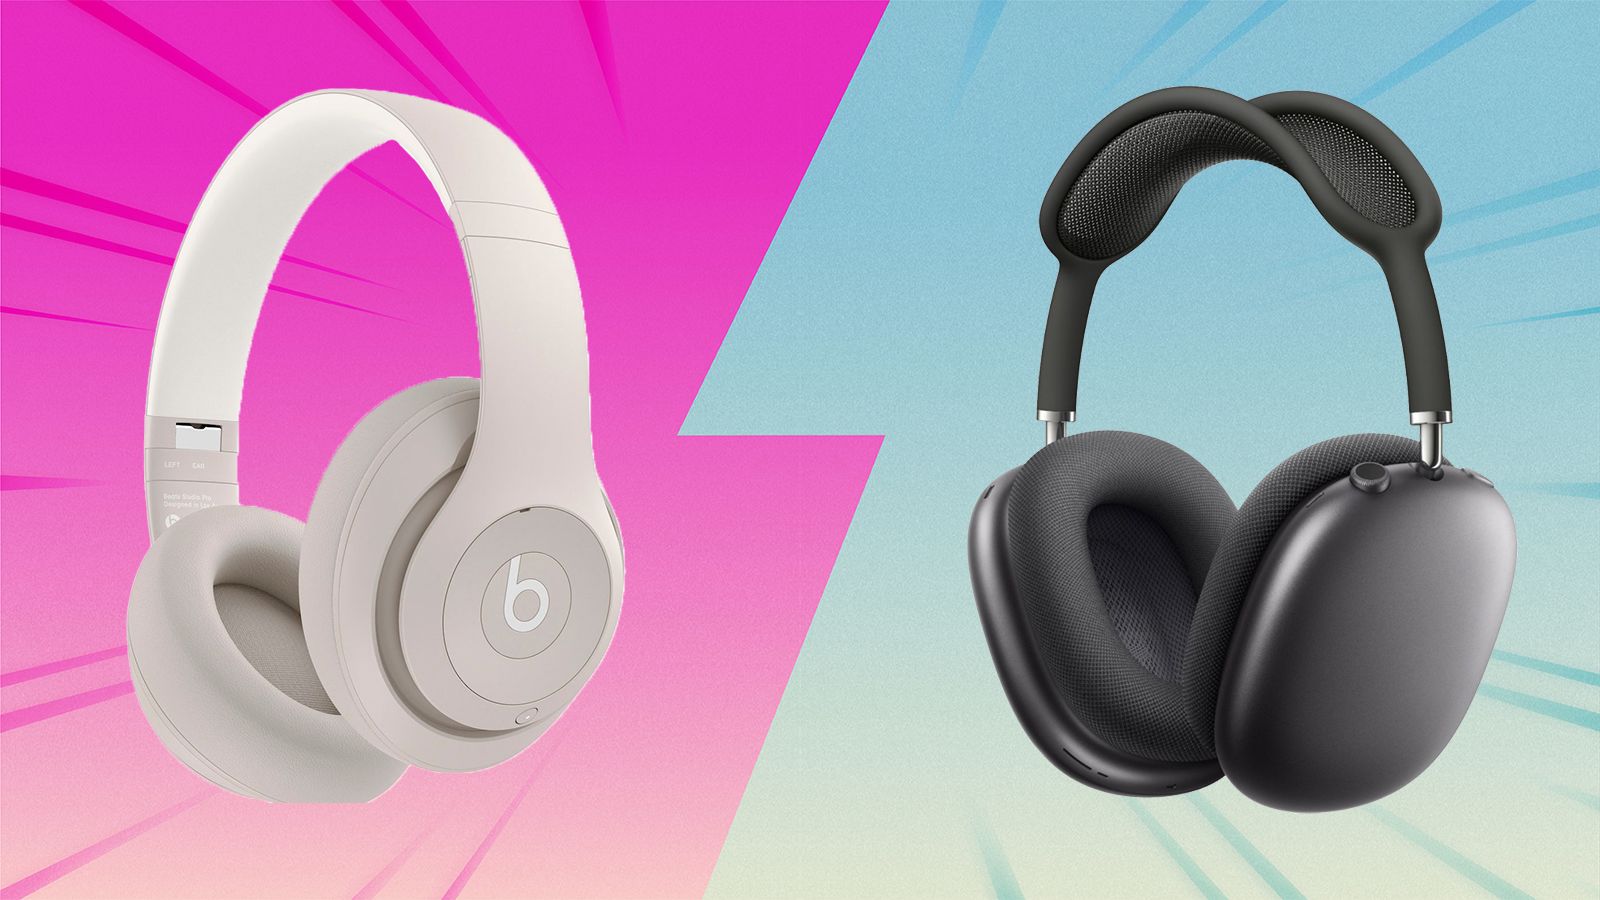 Beats Studio3 review: Booming sound, noise cancelation and comfort